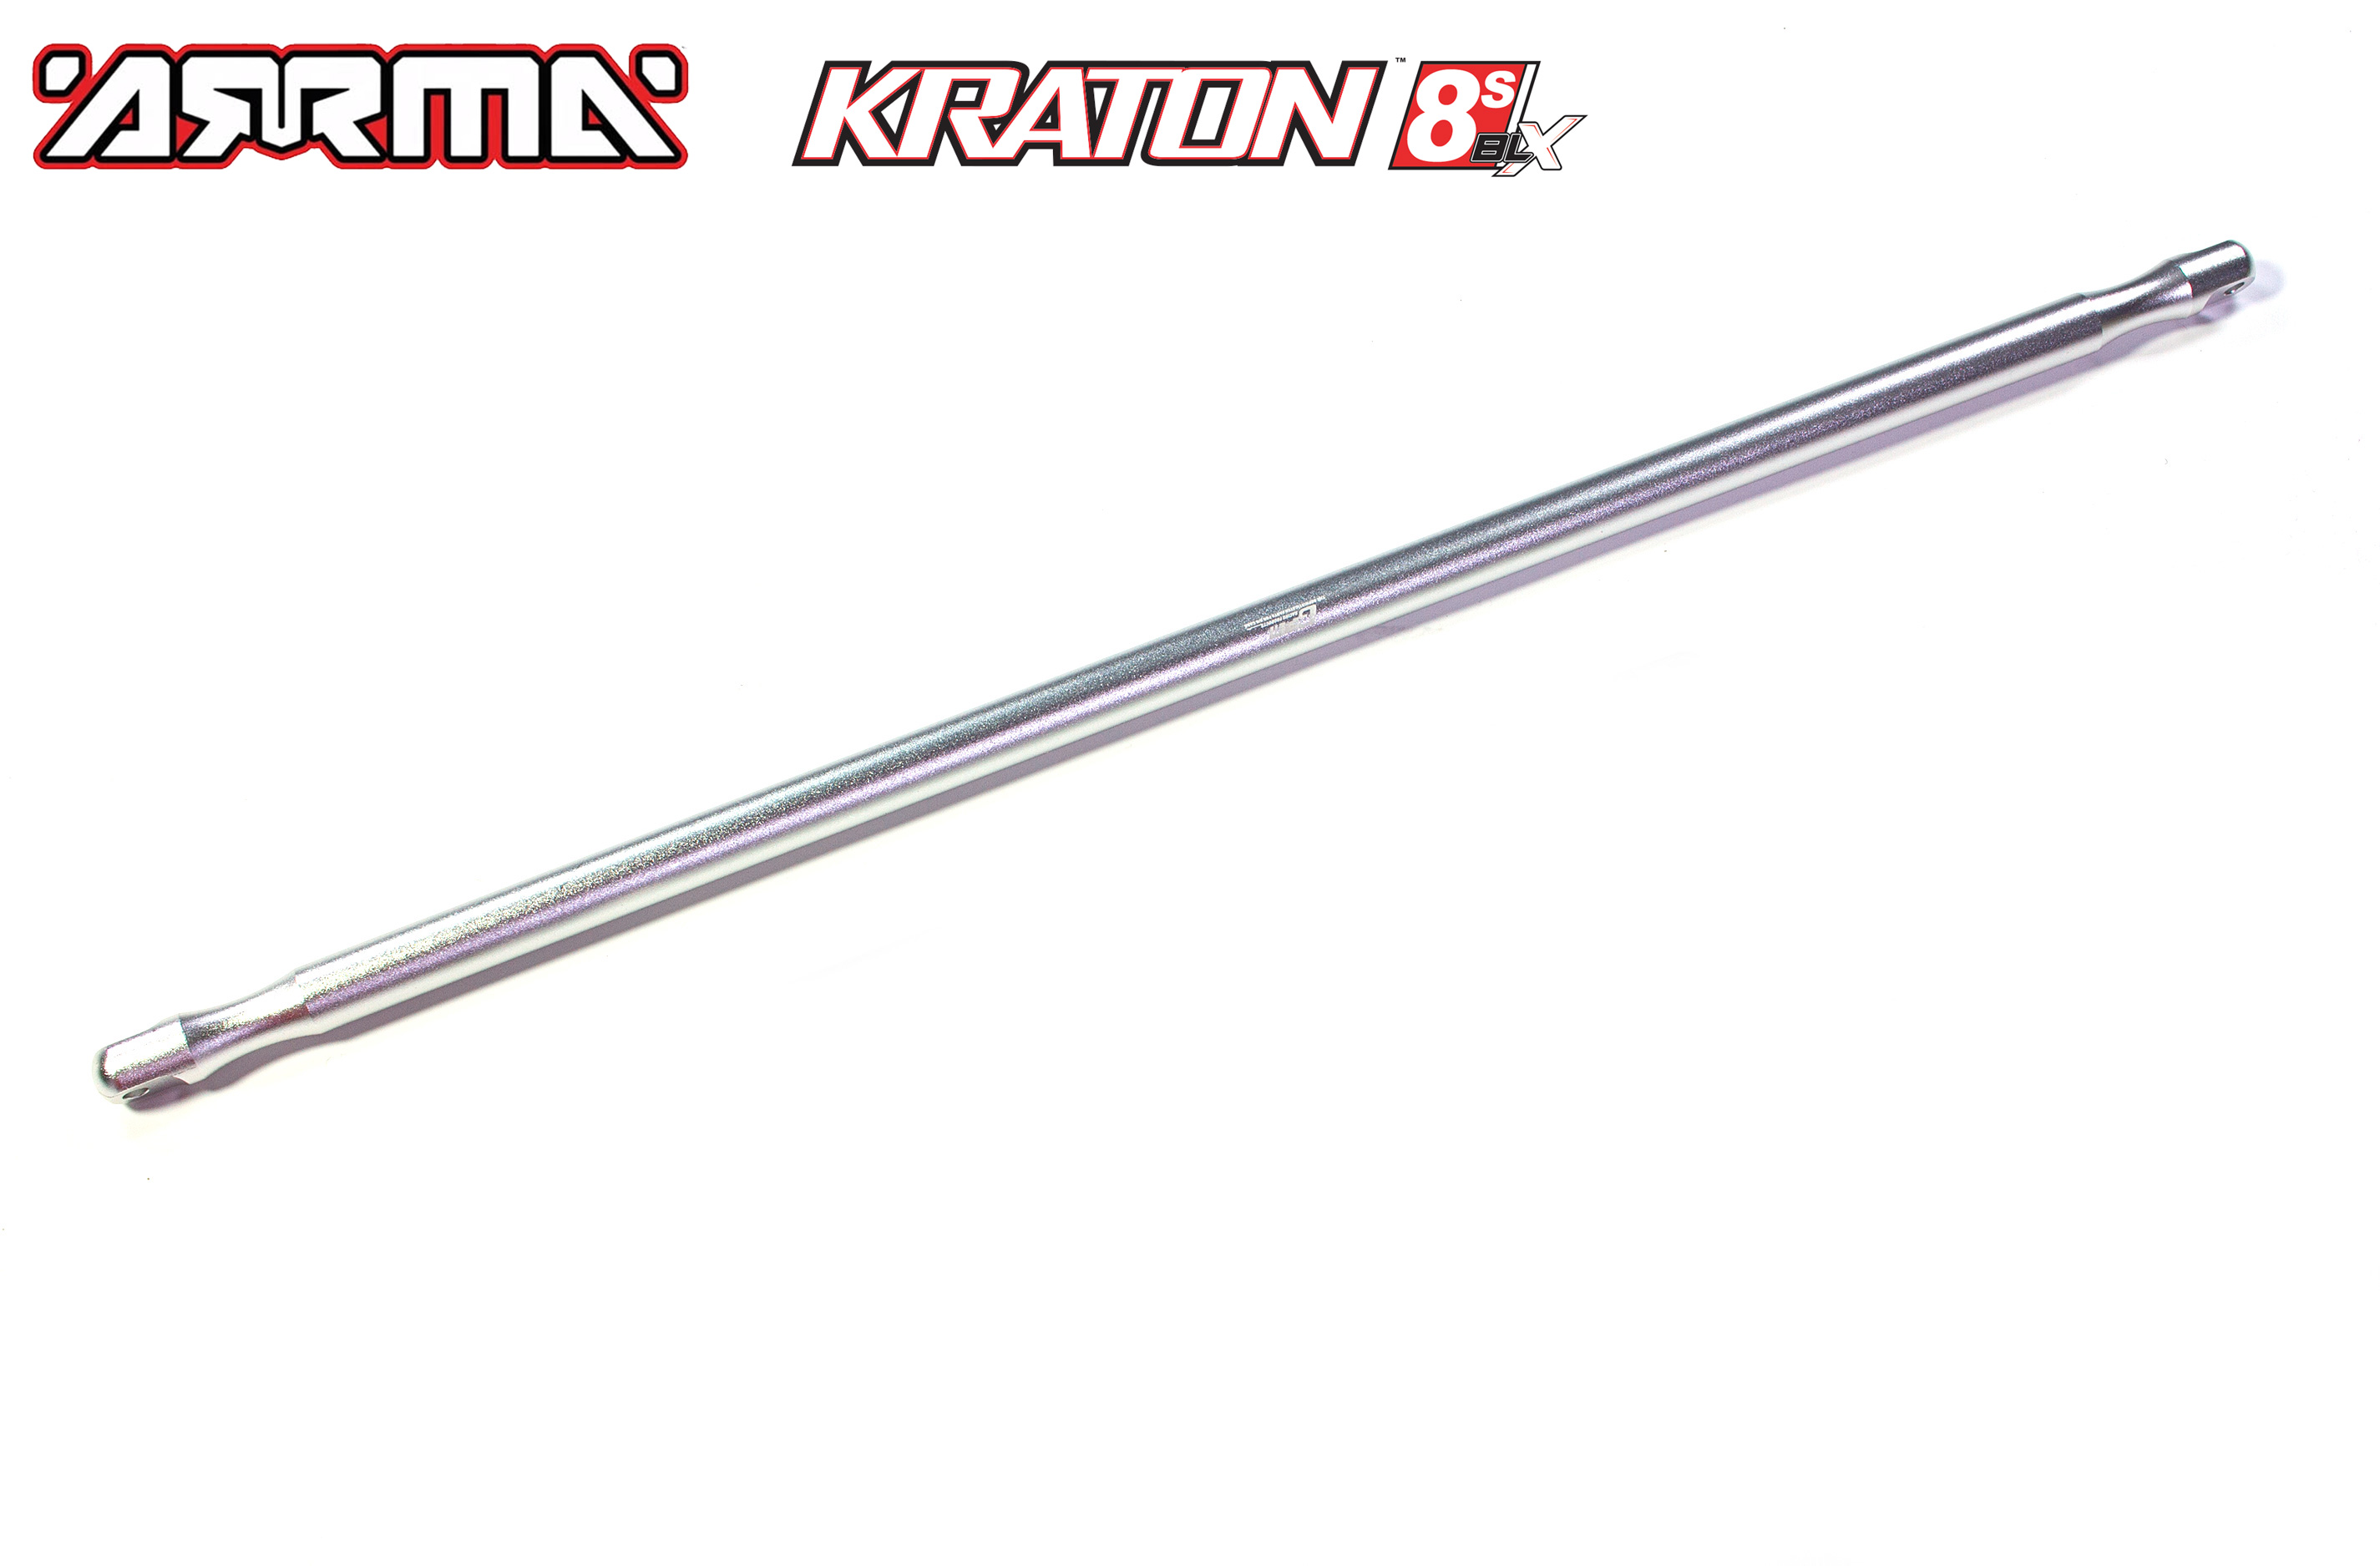 AKX025M GPM center chassis strut for Arrma Kraton 8S Version 1